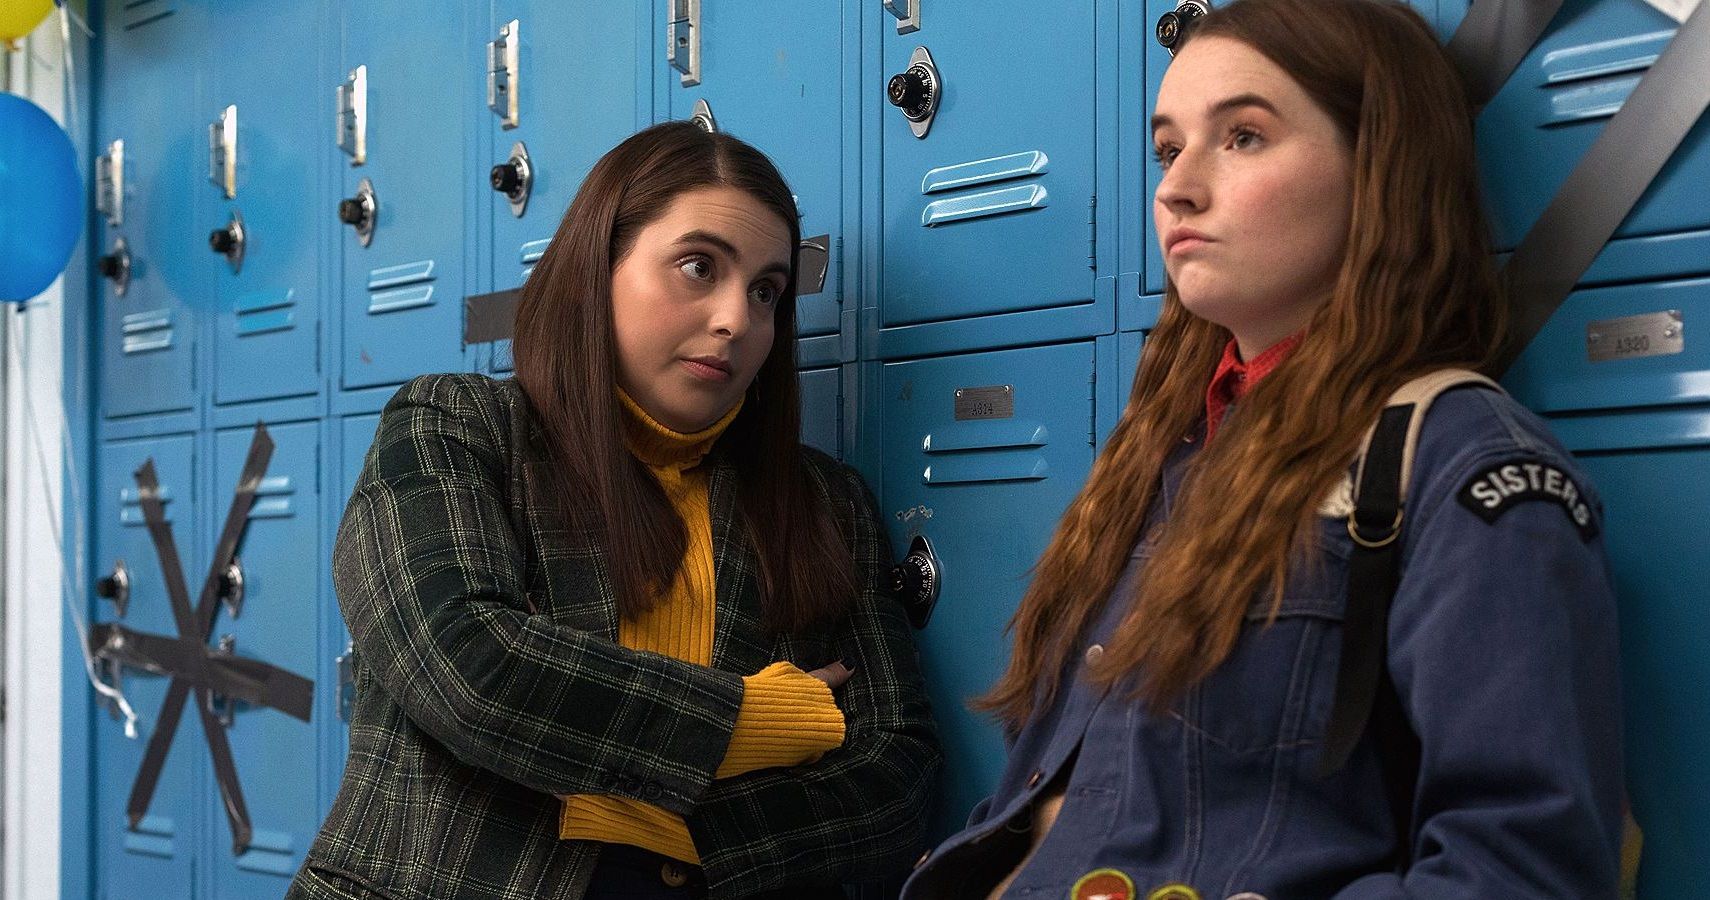 Booksmart 5 Scenes That Made Us Laugh Out Loud (& 5 That Hit Us In The Feels)